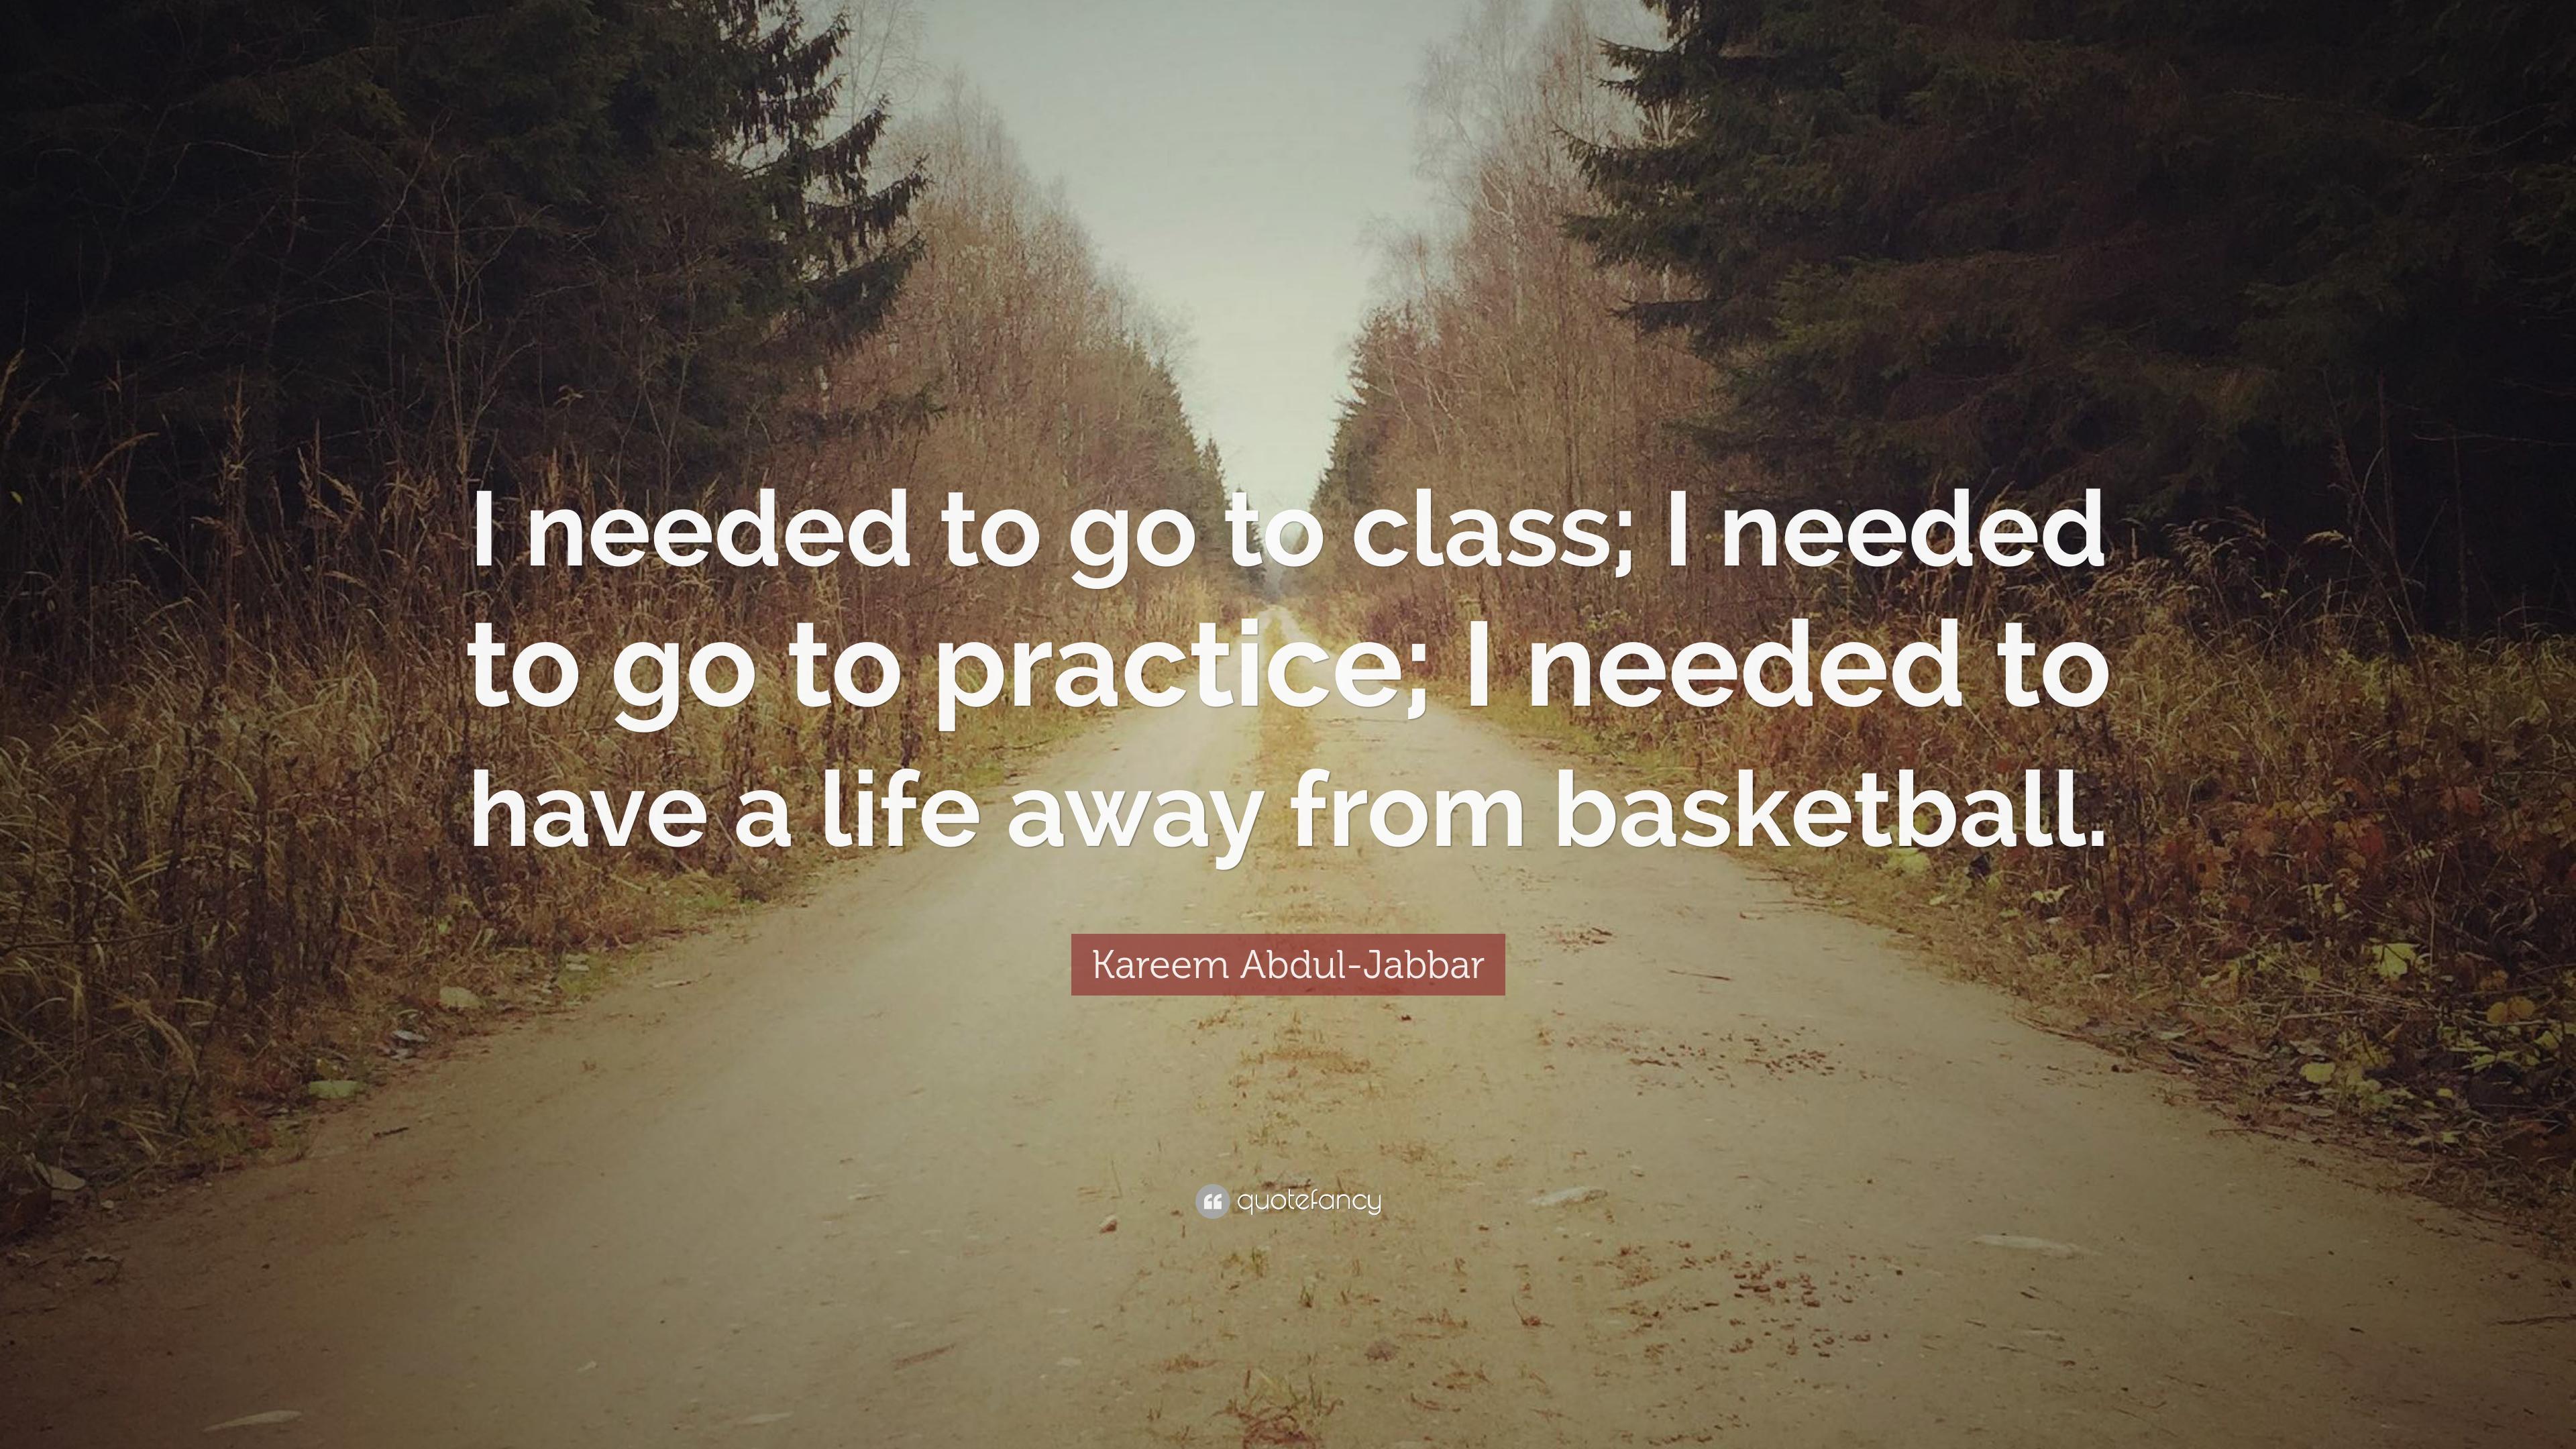 Kareem Abdul Jabbar Quote: “I Needed To Go To Class; I Needed To Go